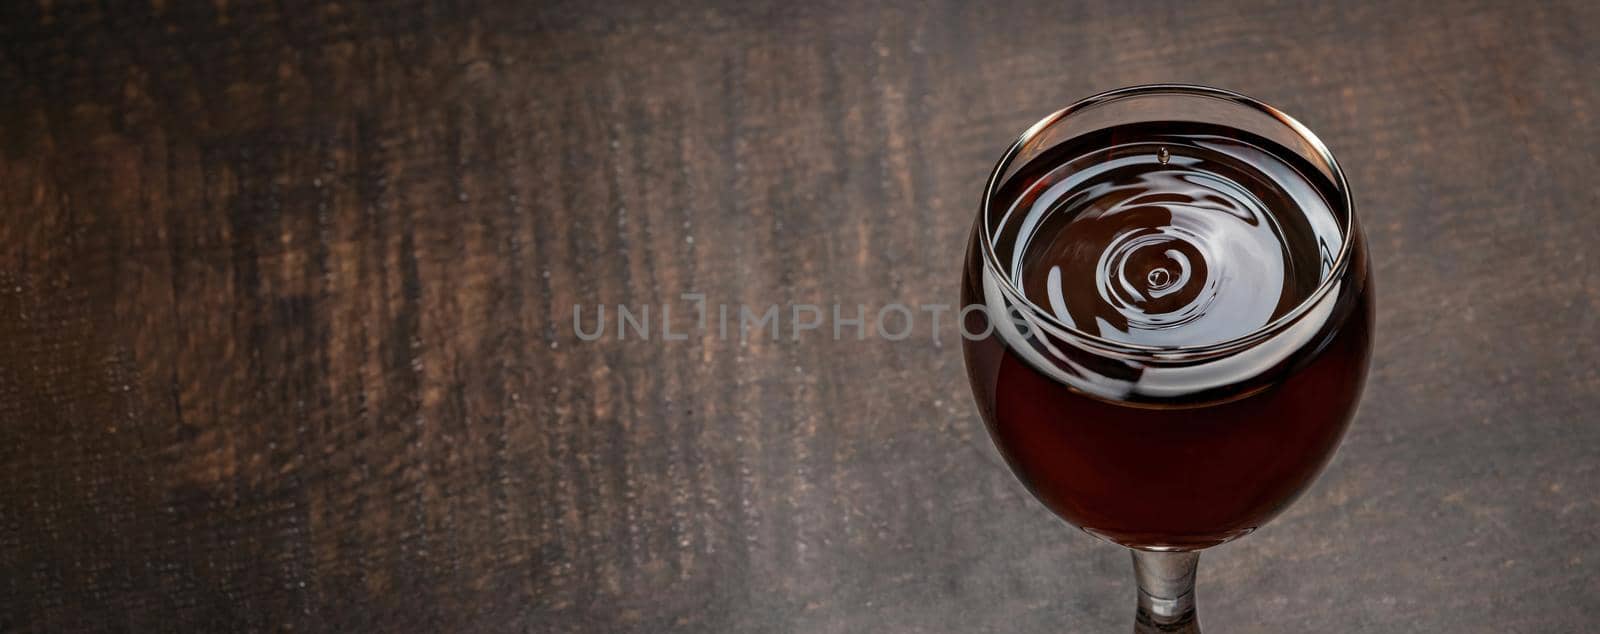 Drops of wine and waves forming in a glass full of red wine standing on a wooden table by Sonat